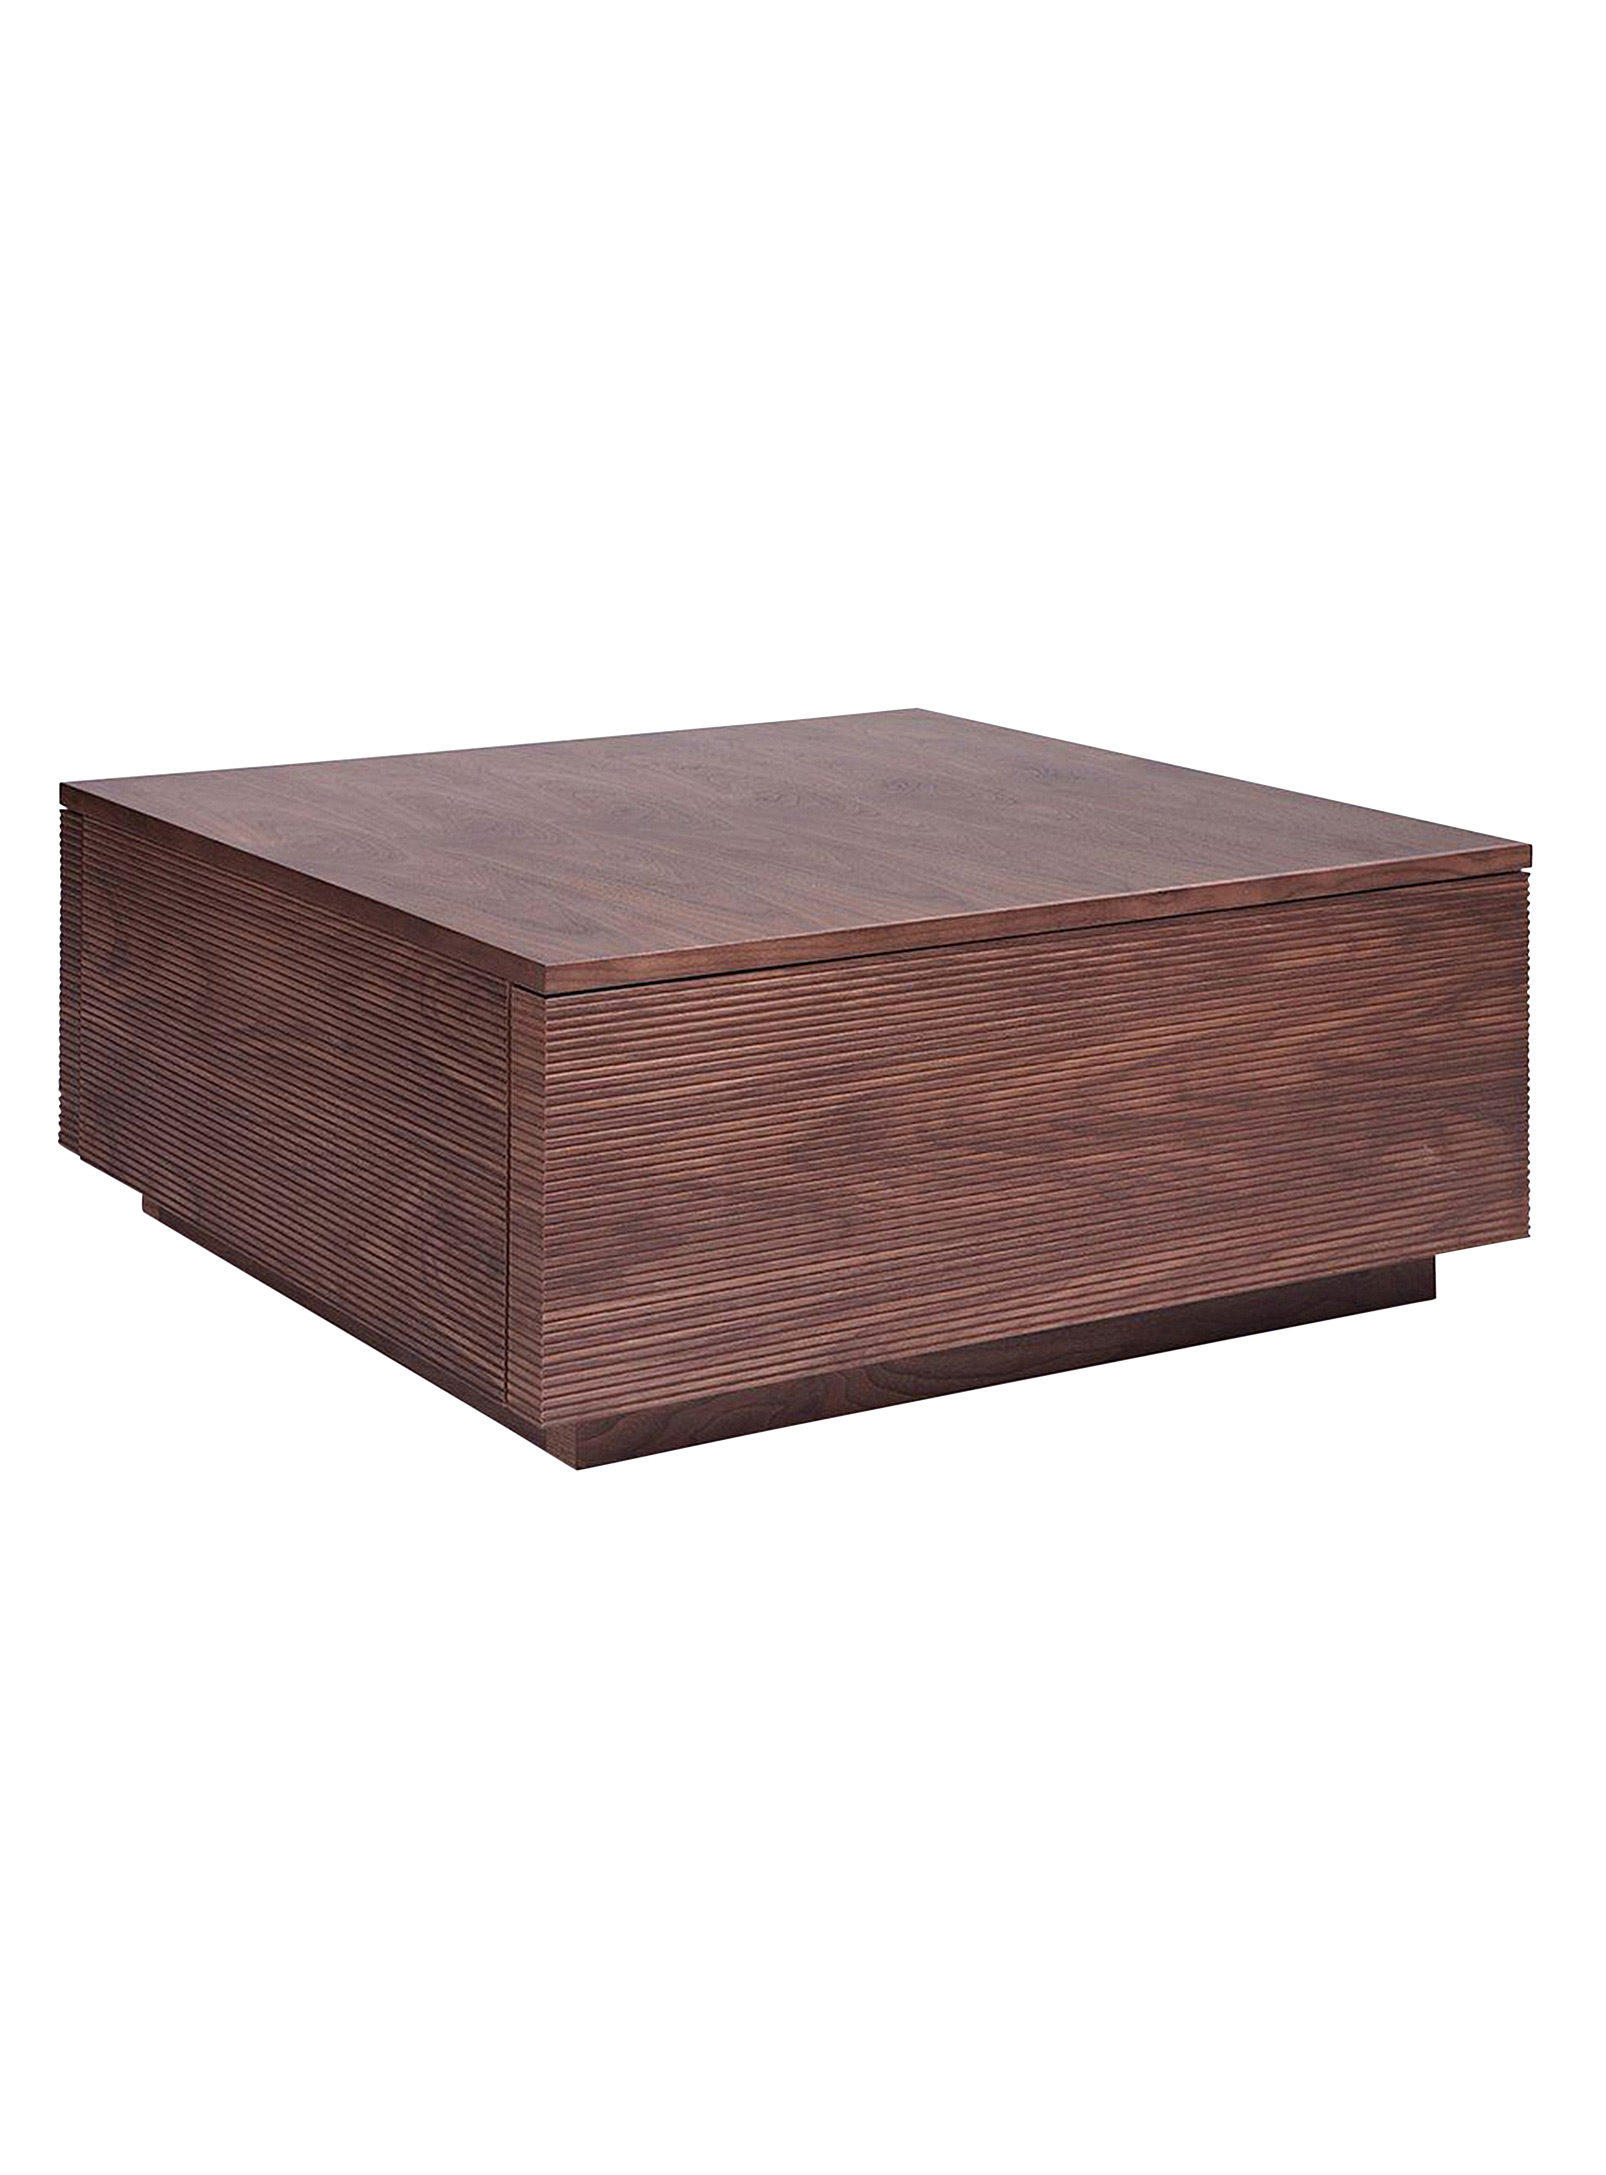 Simons Maison Modern Square Coffee Table In Brown